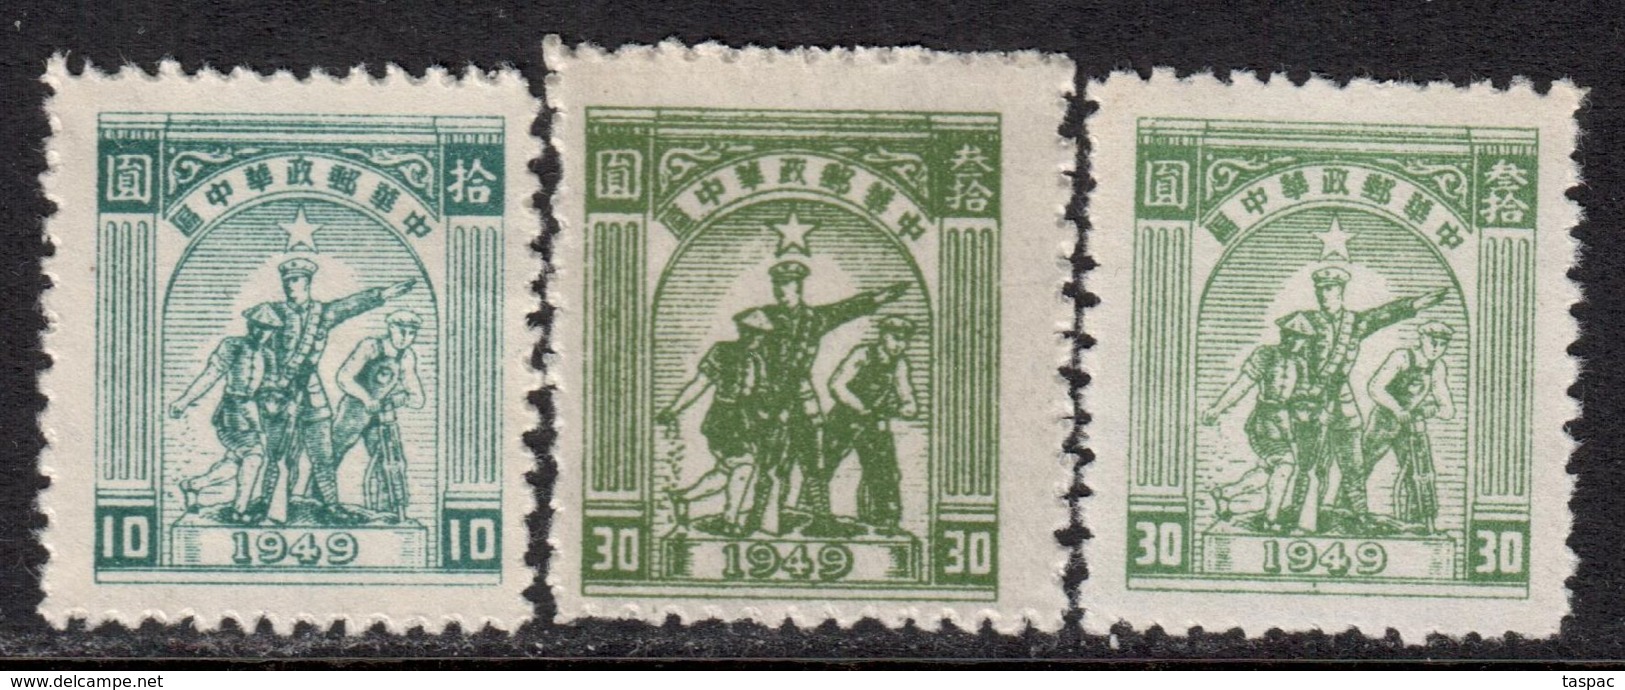 Central China 1949 Mi# 87, 89 A, 89 B (*) Mint No Gum - Short Set - Farmer, Soldier And Worker - Centraal-China 1948-49